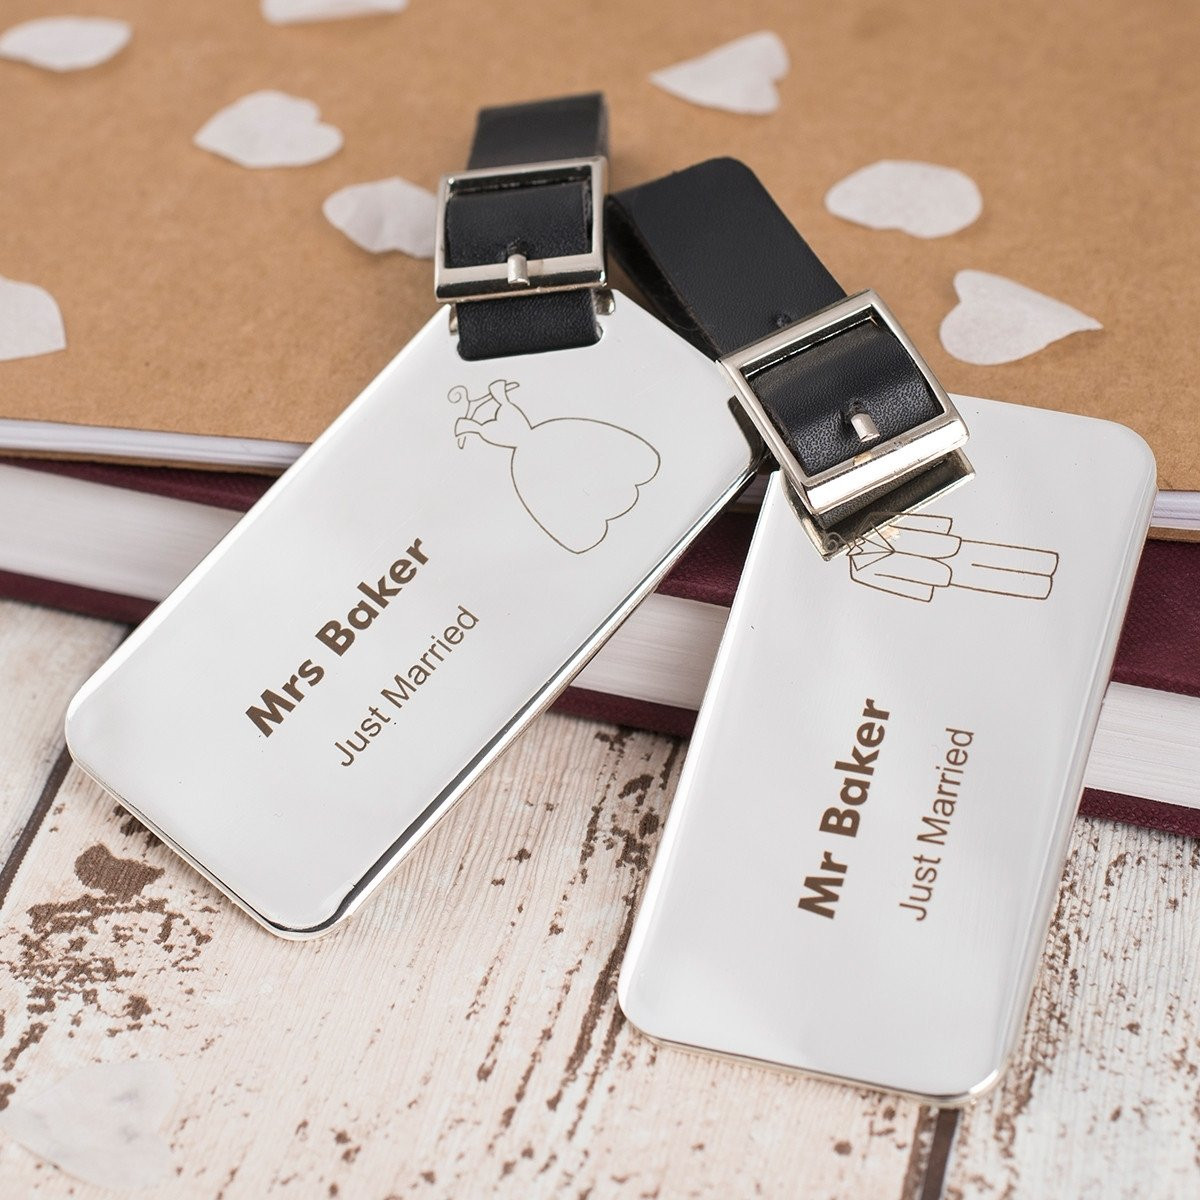 Gift Ideas For Married Couples
 10 Fabulous Gift Ideas For Married Couples 2019